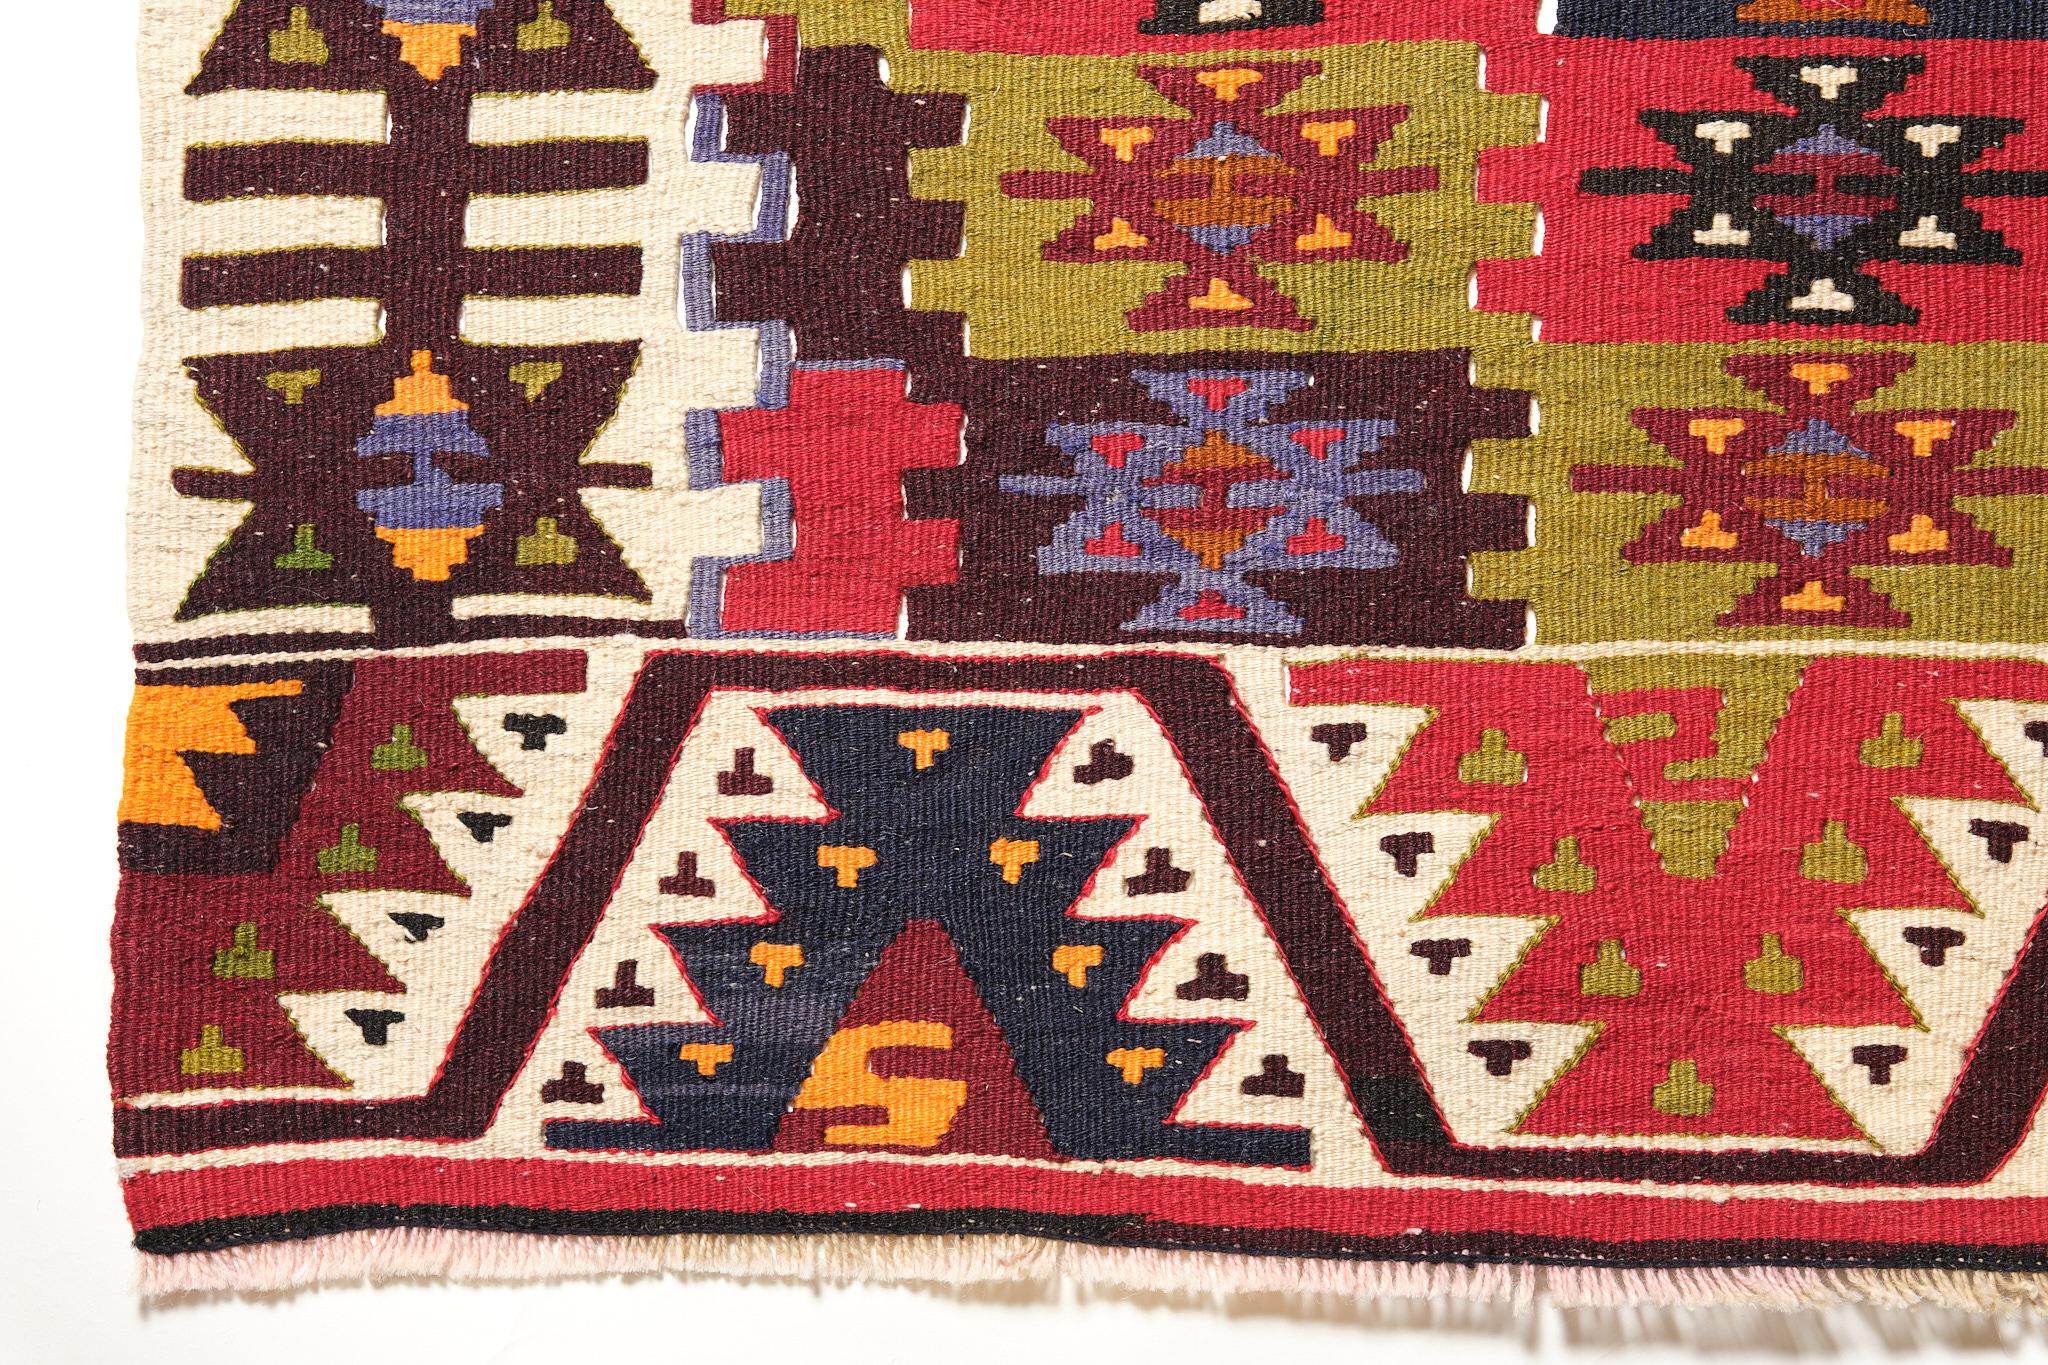 This is a Southern Anatolian made in two halves of old Kilim from the Adana region with a rare and beautiful color composition.

Adana Situated in the fertile Çukurova plain (previously known as the Cilician plain, through which the Seyhan and